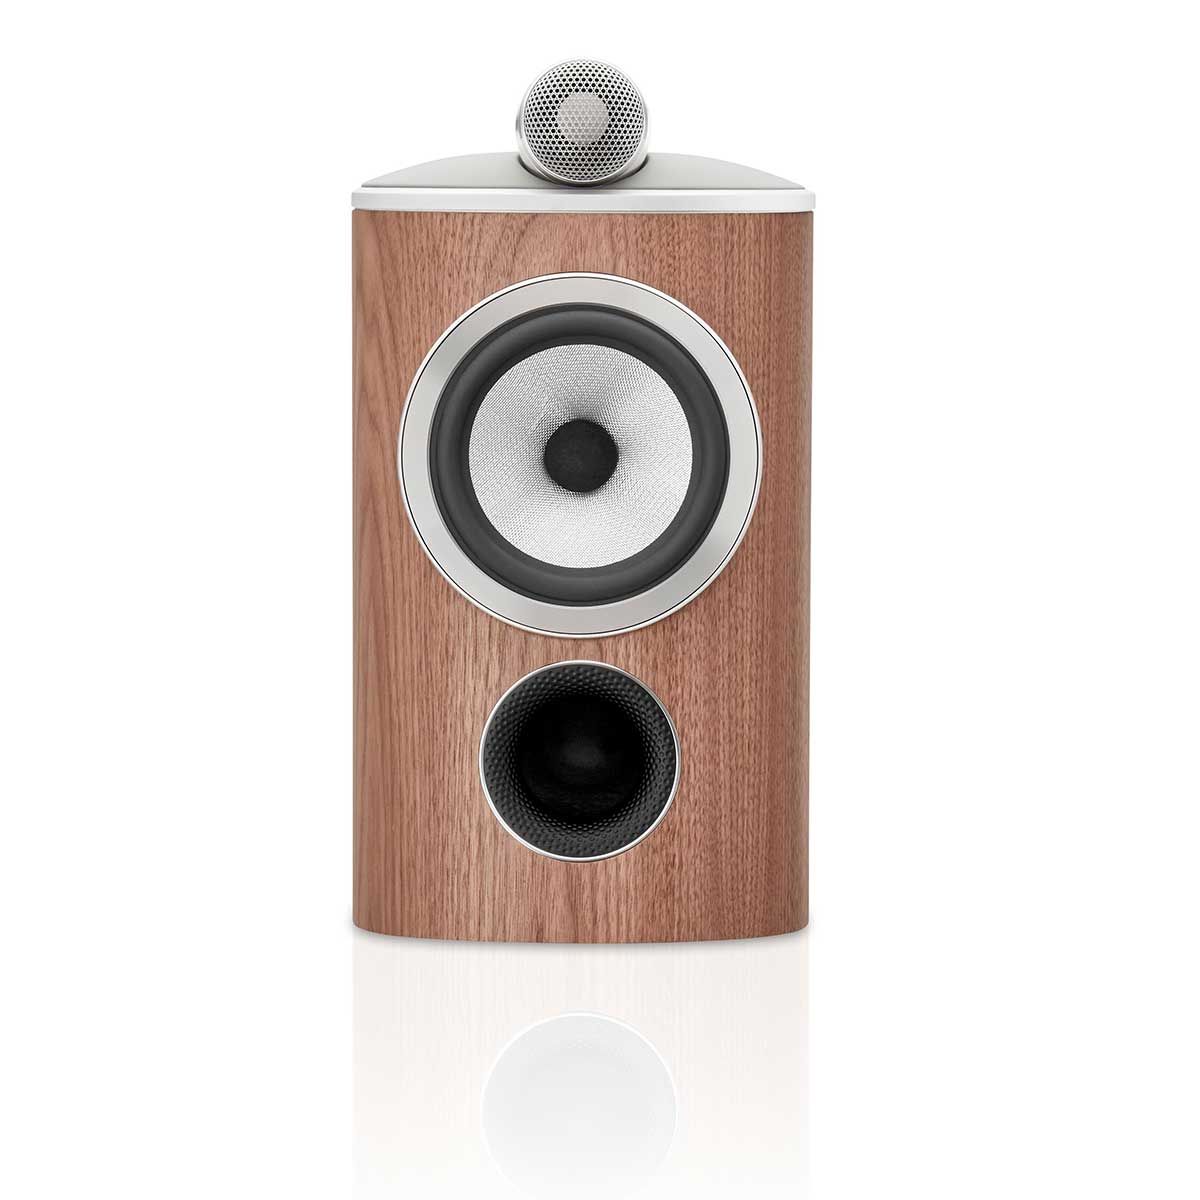 Bowers & Wilkins 805 D4 Bookshelf Speaker, Satin Walnut, front view without grille